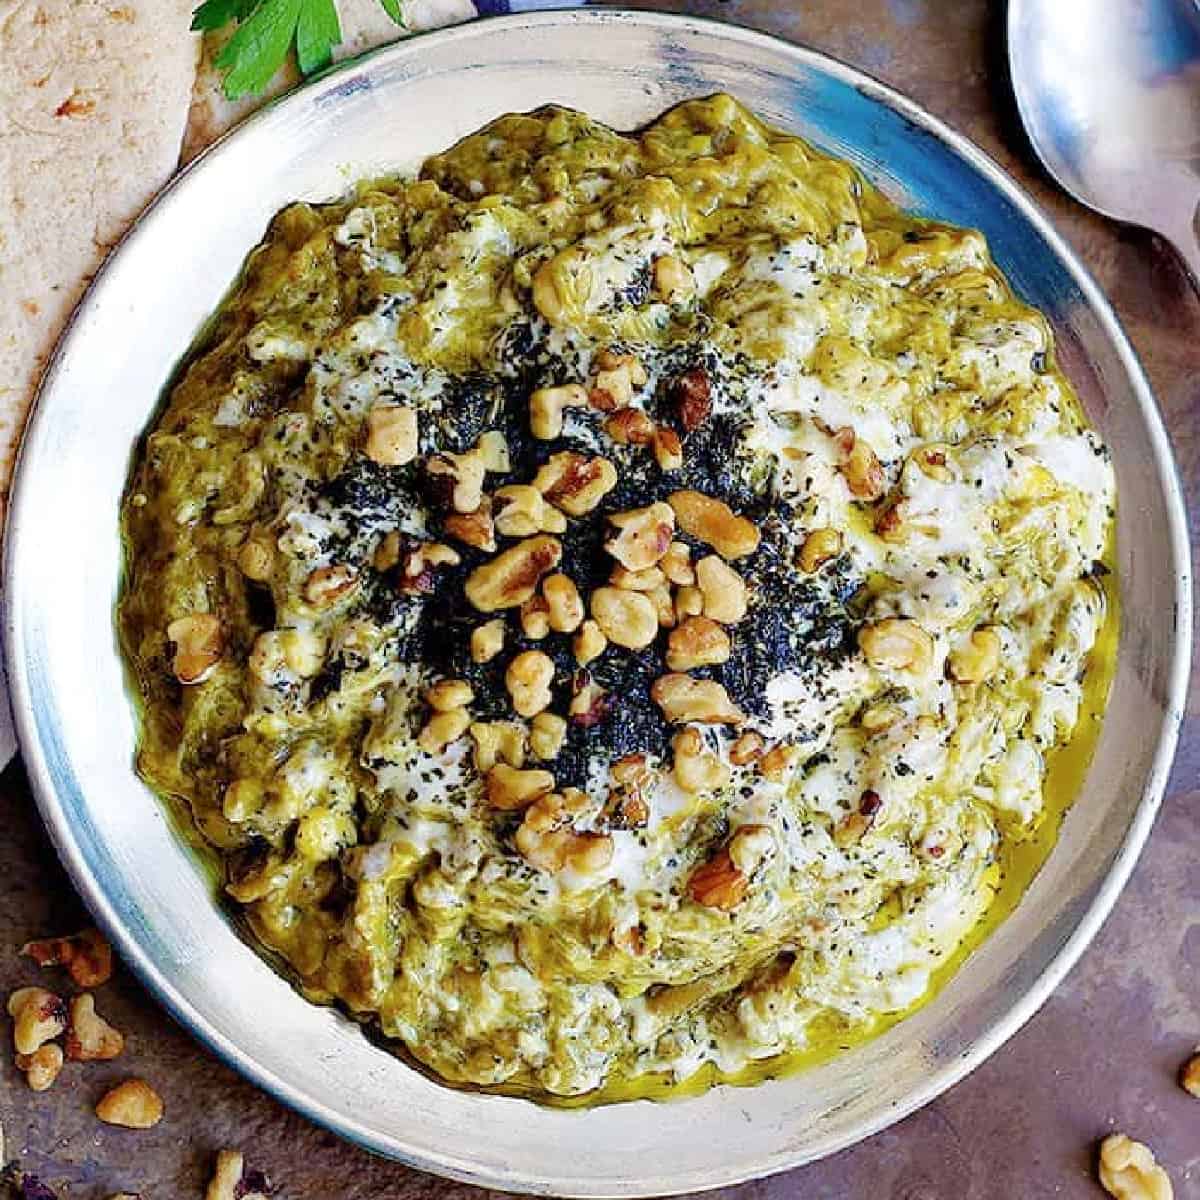 Kashke bademjan is a simple Persian eggplant dip that is made with a handful of ingredients. This tasty vegetarian dip is full of amazing flavors and makes for a perfect appetizer!
